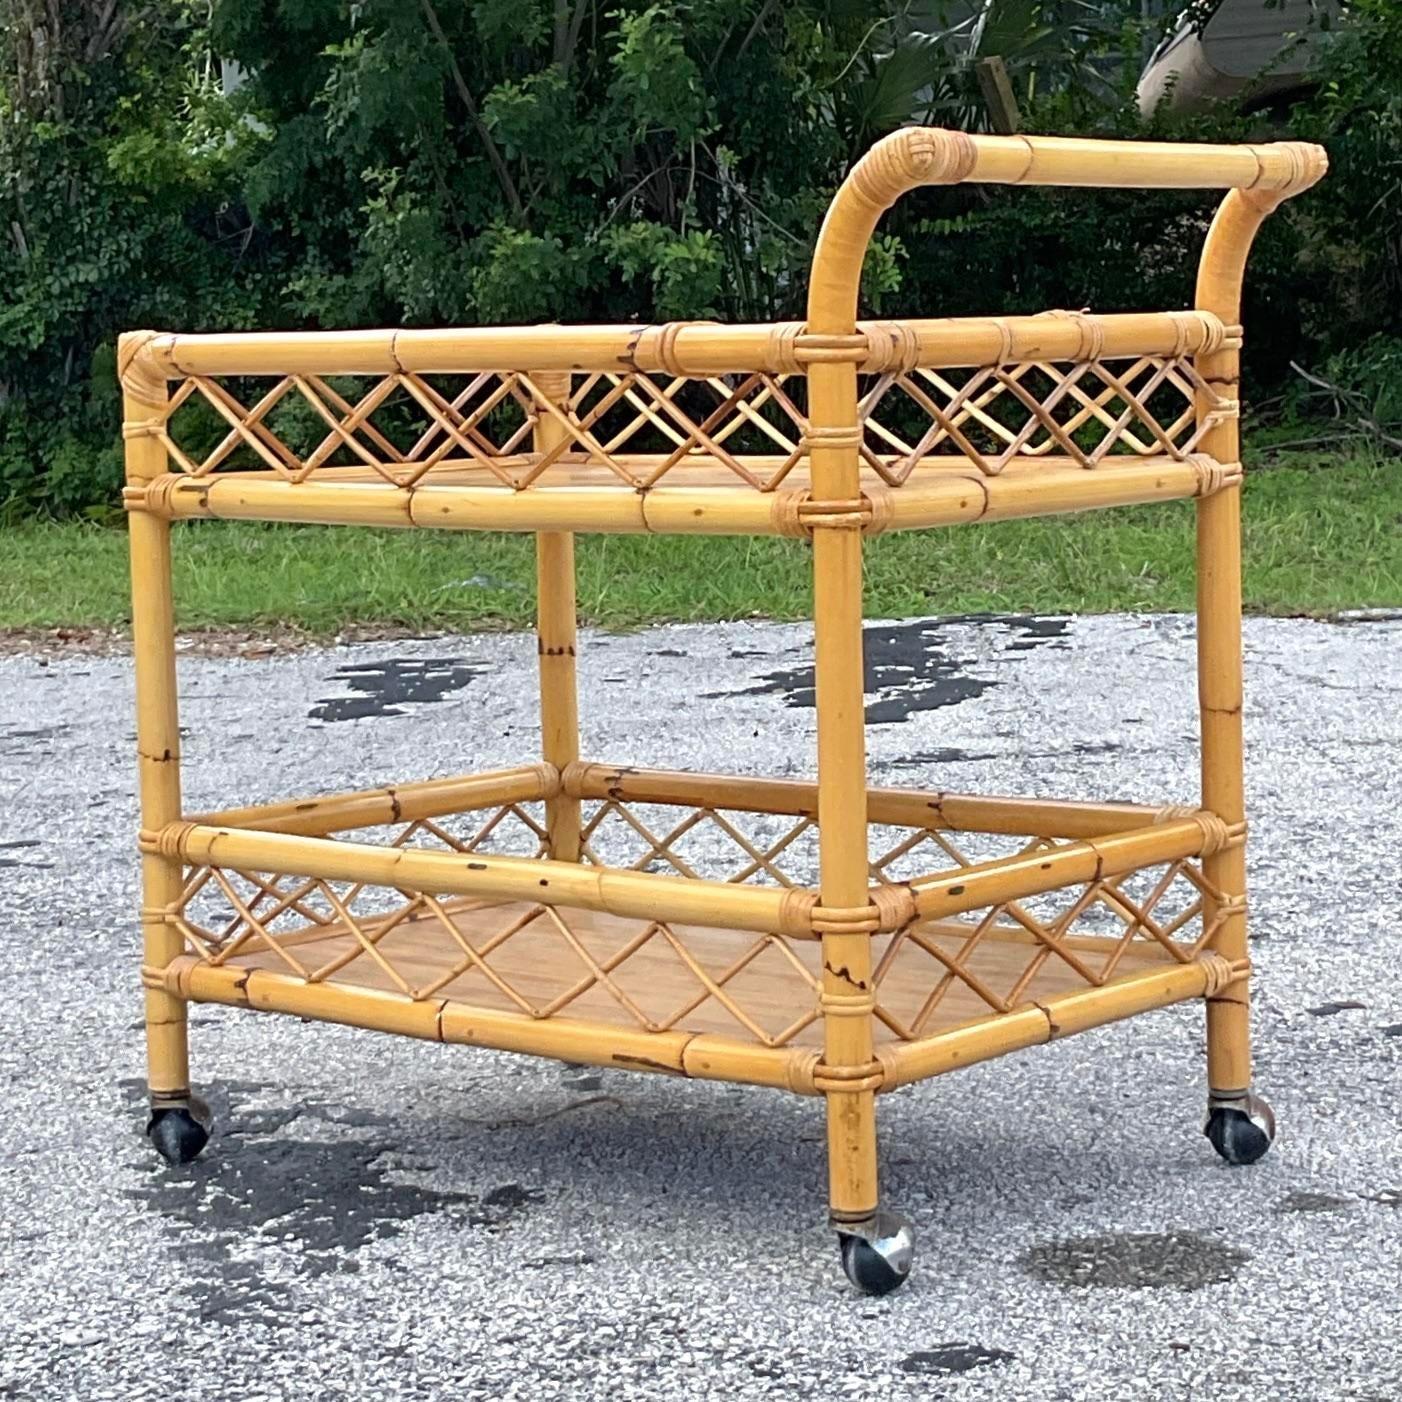 A fabulous vintage Coastal bar cart. A chic wrap around trellis deign on a rolling rattan frame. Laminate shelving make this cart both beautiful and durable. Acquired from a Palm Beach estate.